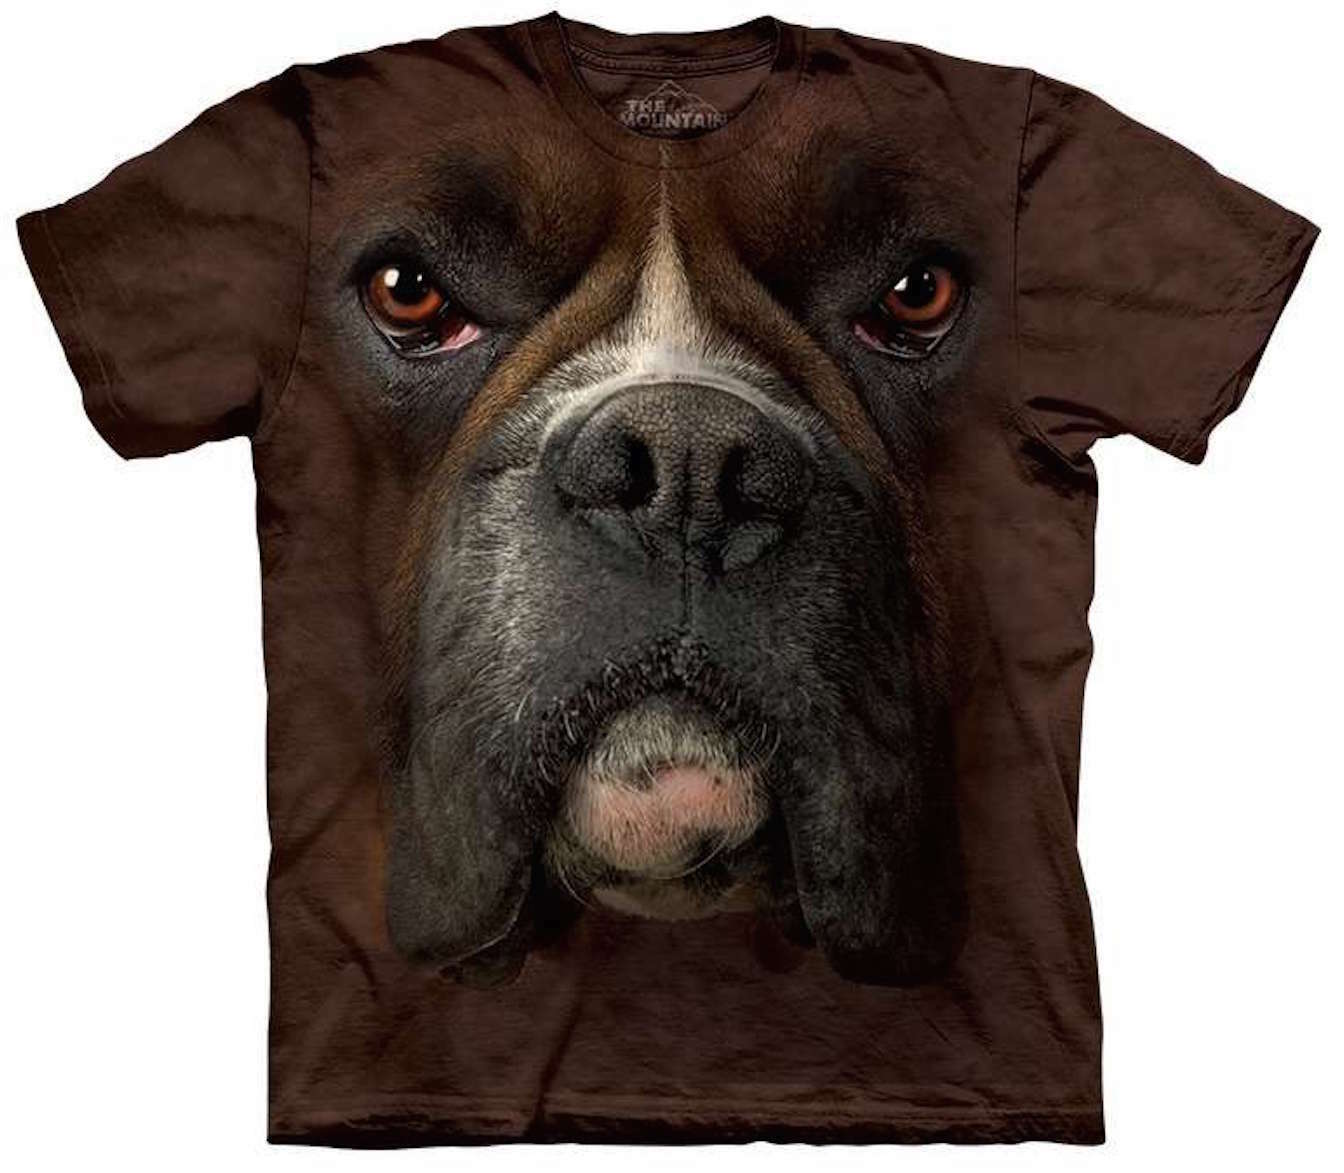 Mountain Boxer Dog Strong Fighter Big Face Dogs Pet Animal Cotton T-Shirt S-3X